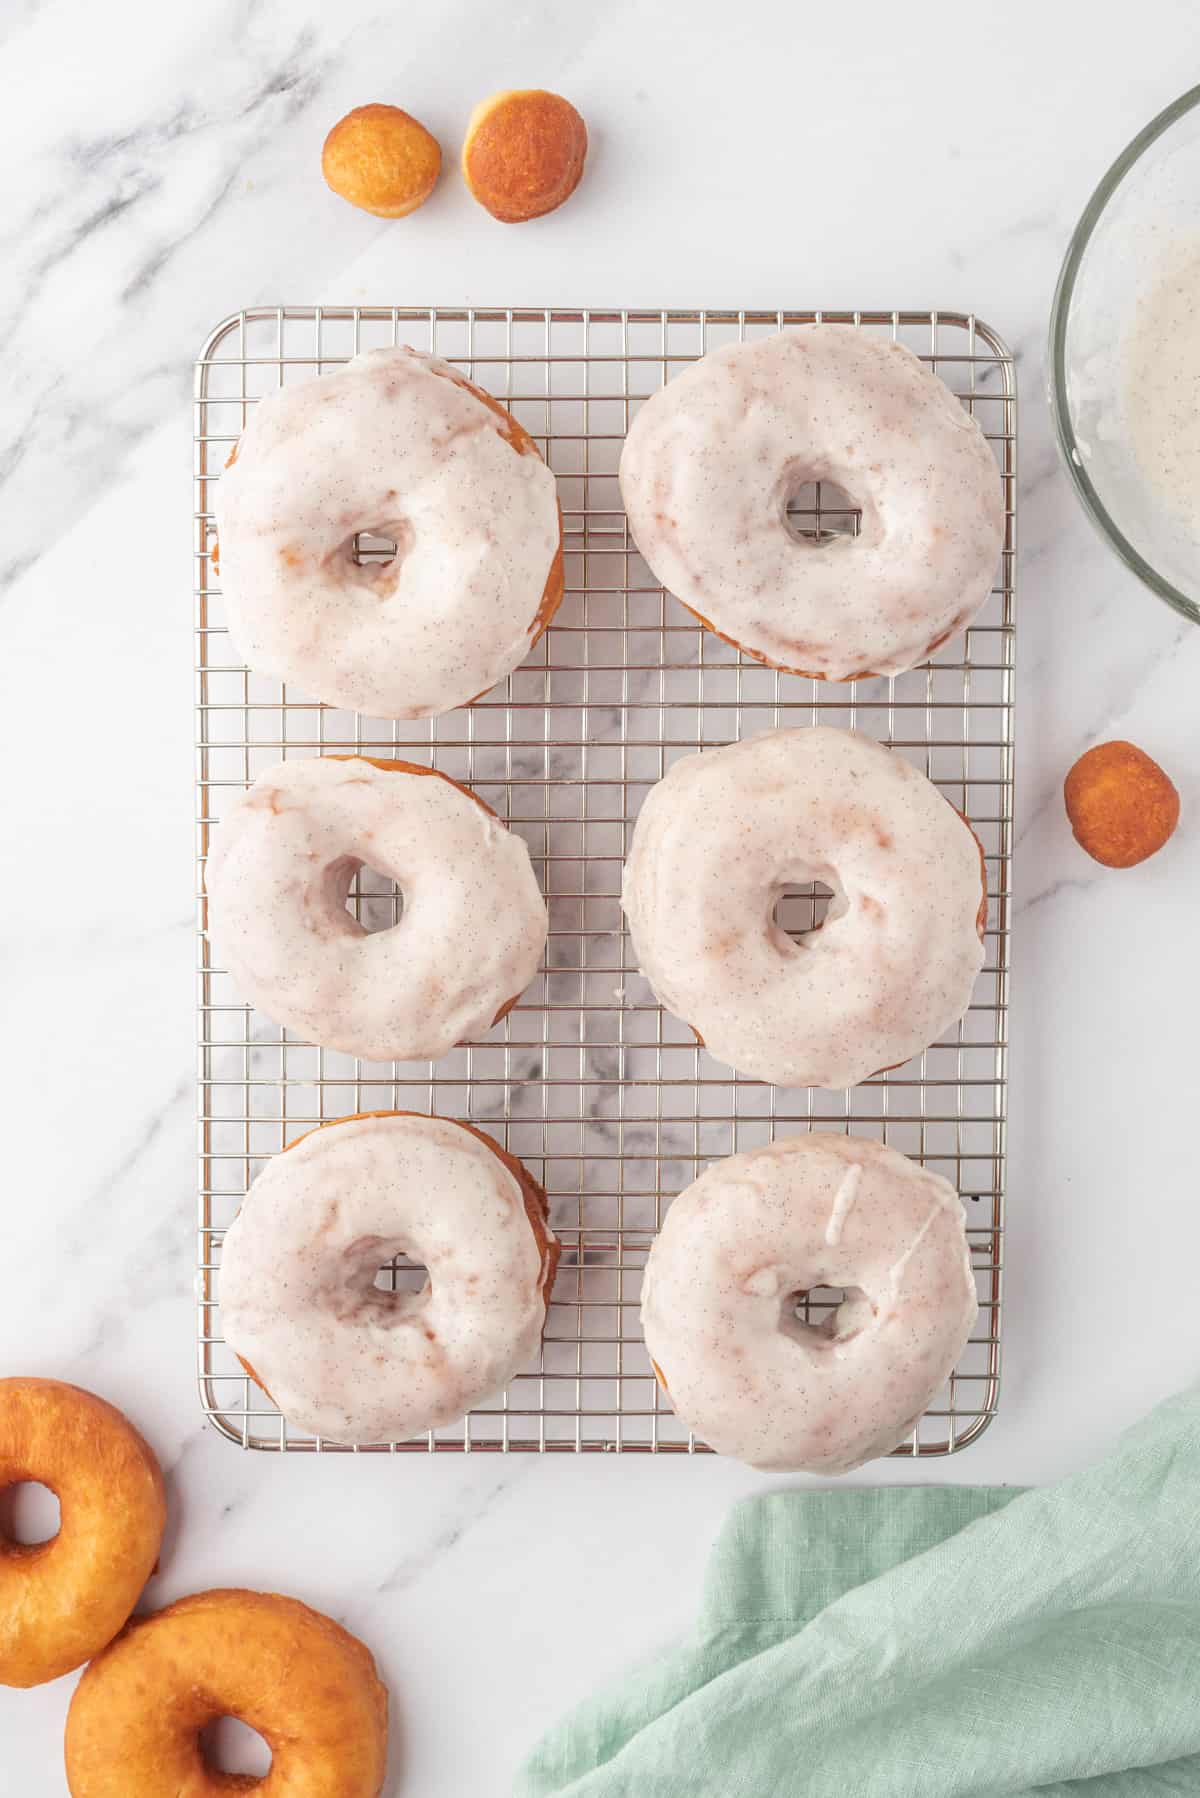 Six donuts are placed on a wire cooling rack.